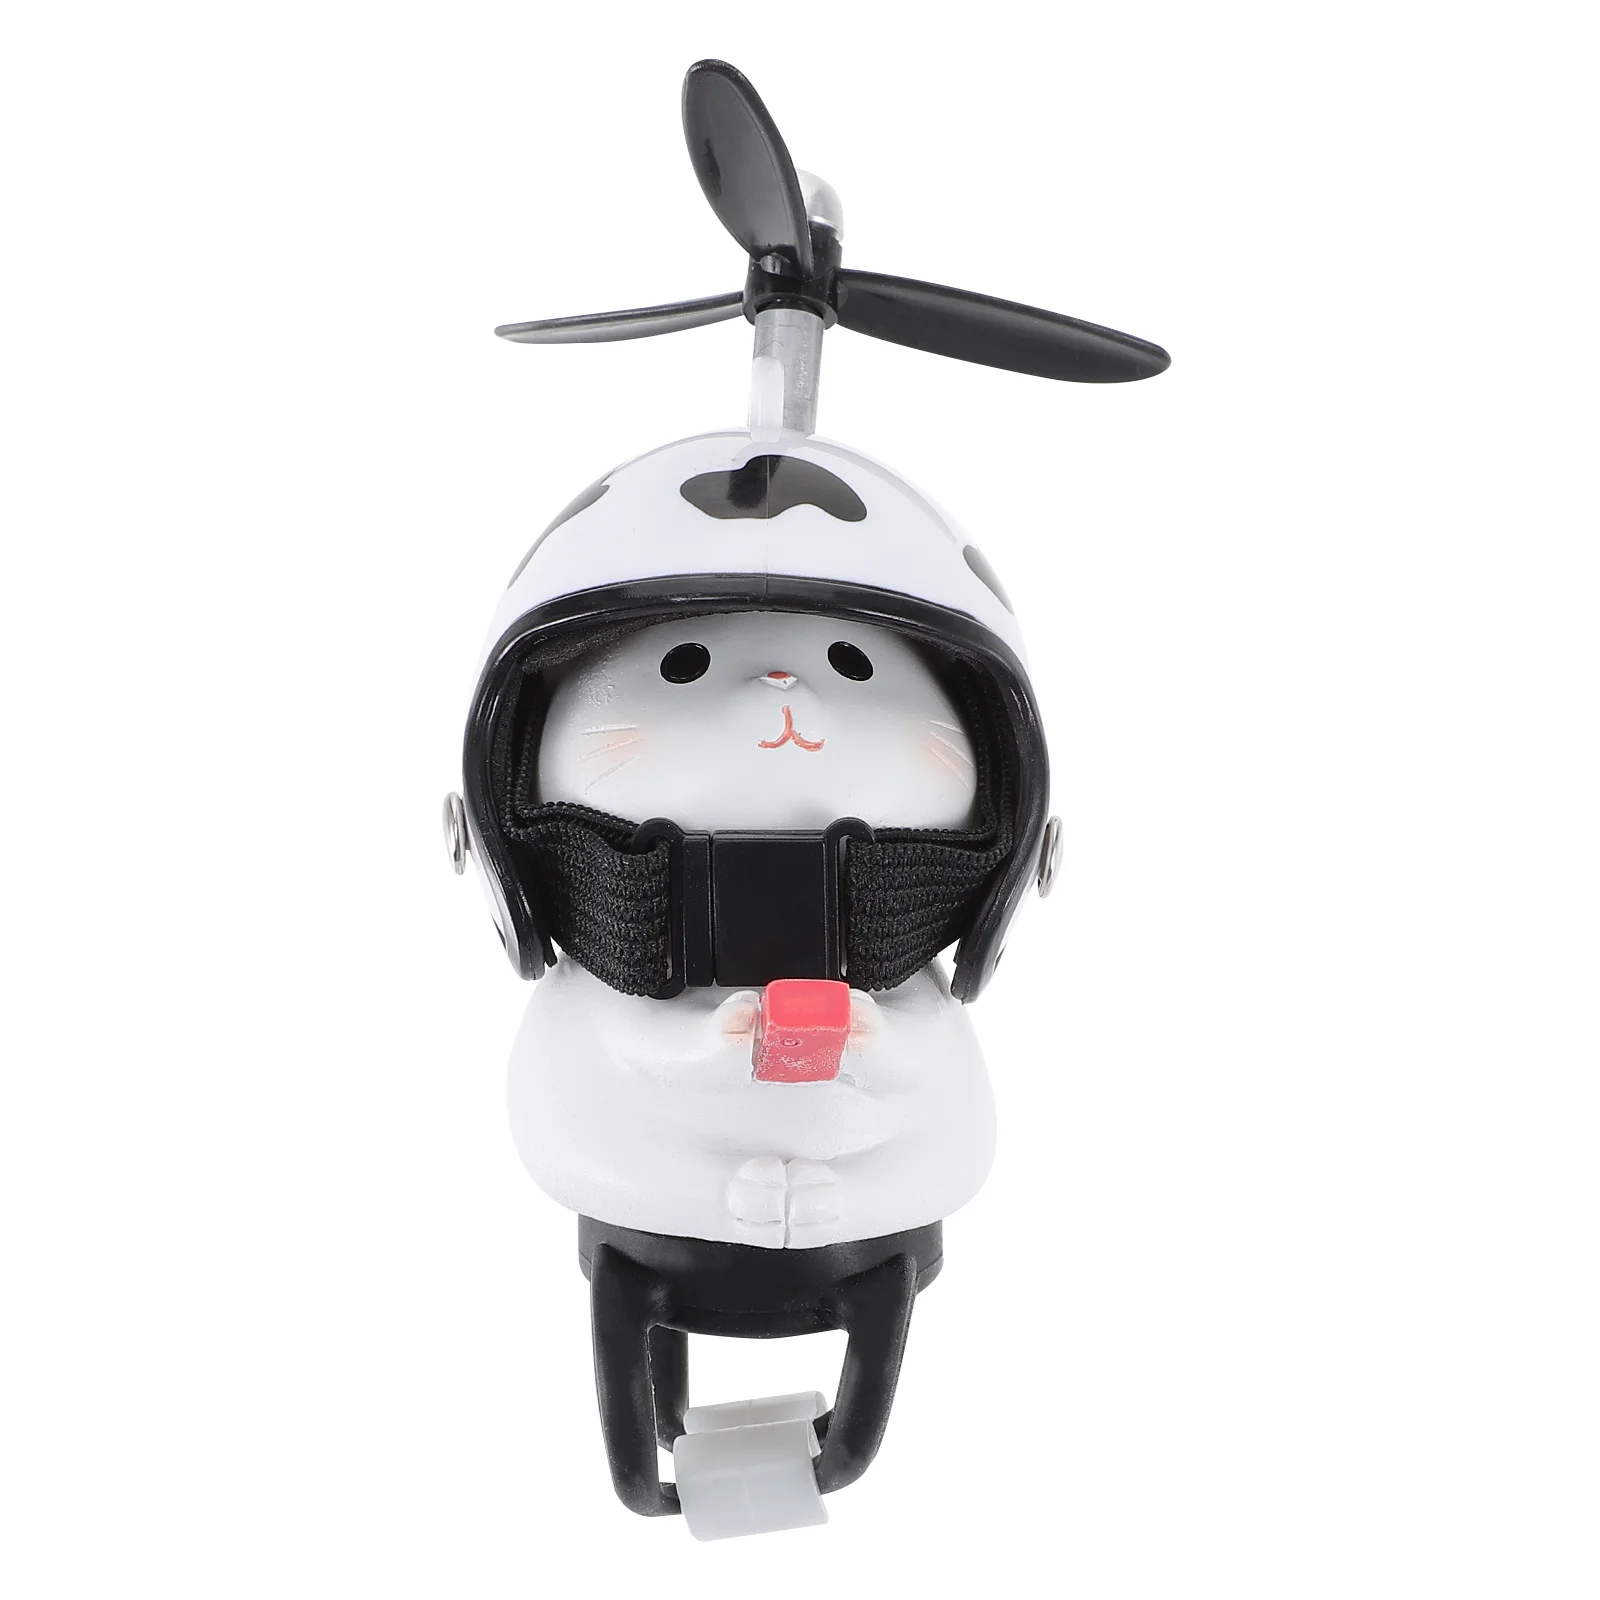 

Cat Ornaments Bike Horn Decor Motorcycle Decoration Bells Car Toys with Propeller Dashboard